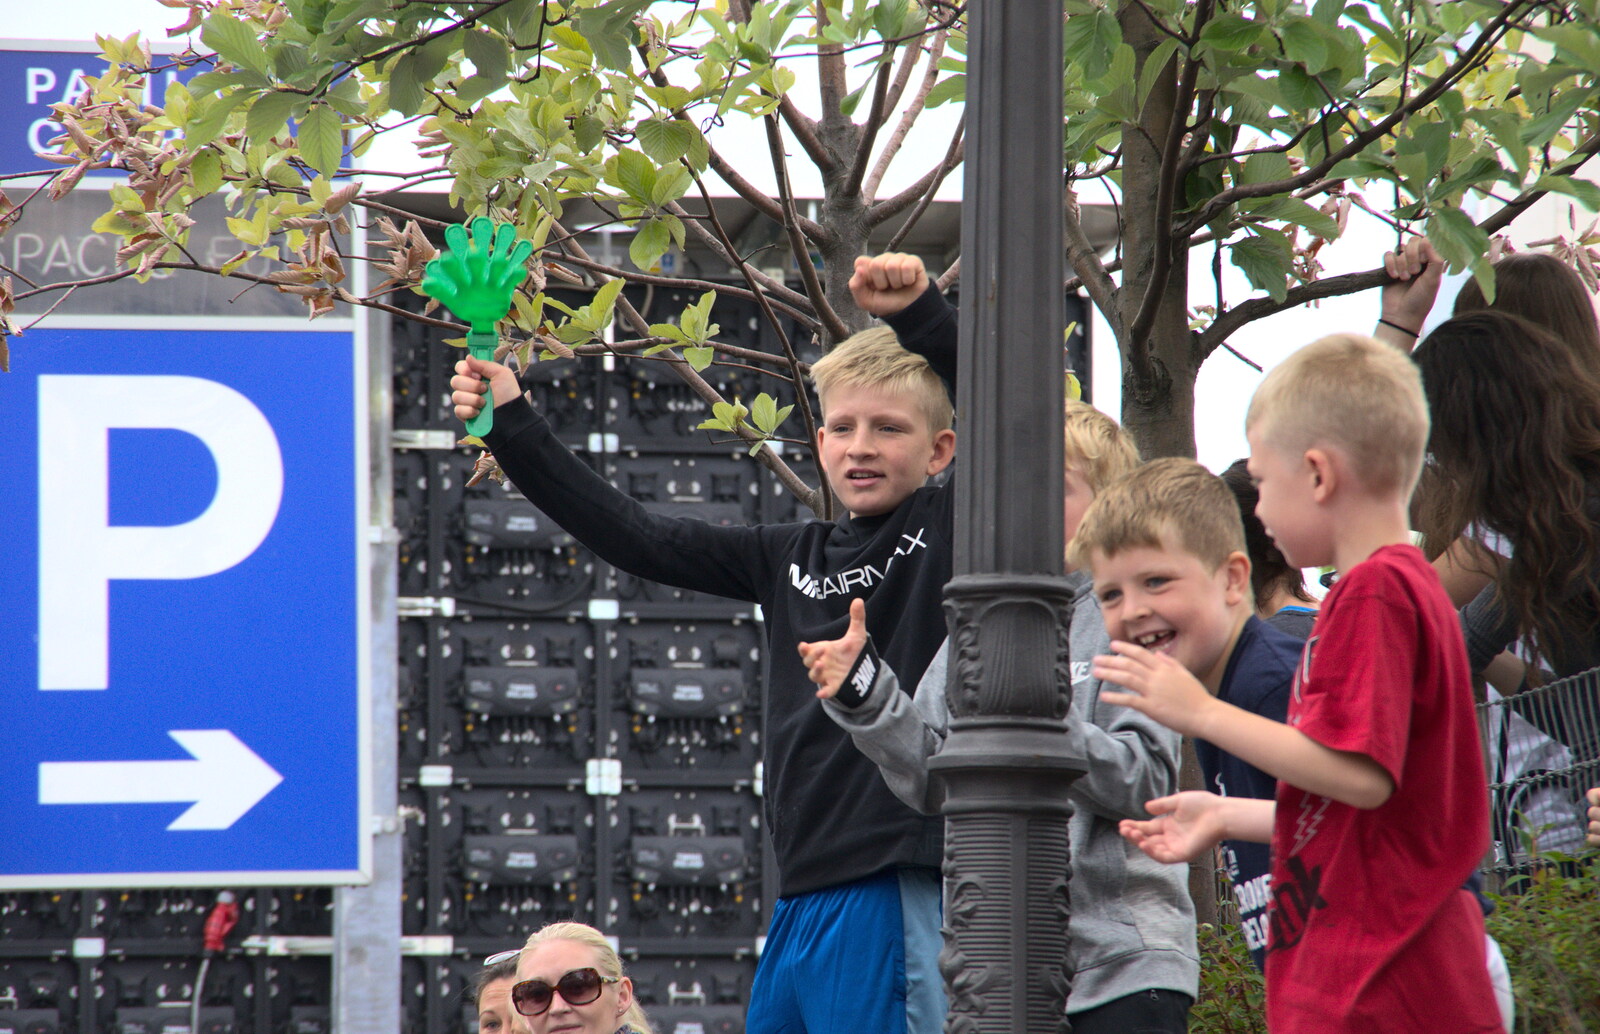 Some kids wave from The Dún Laoghaire 10k Run, County Dublin, Ireland - 6th August 2018